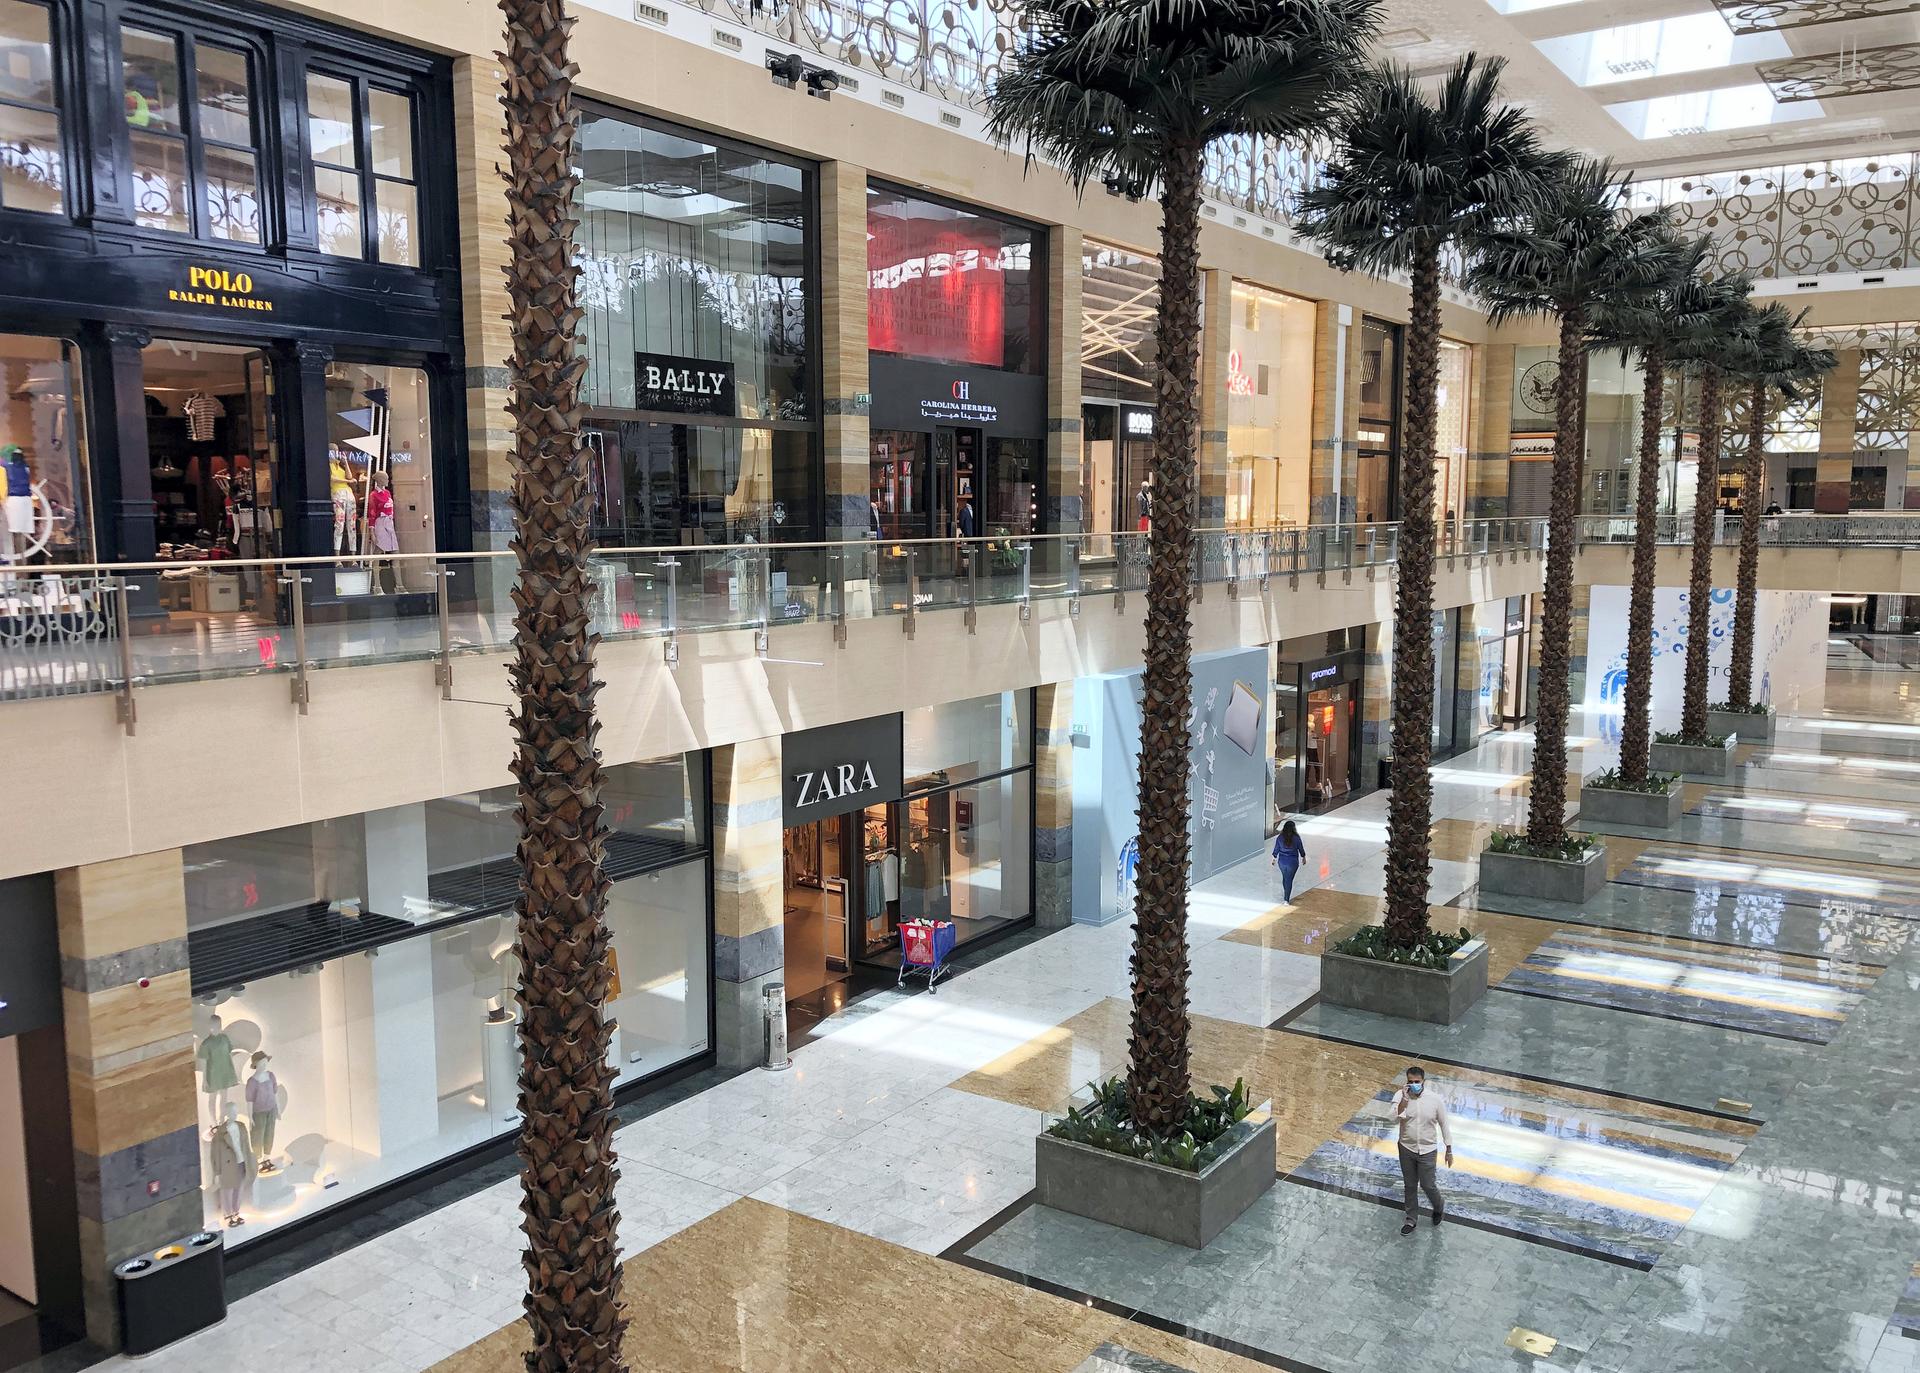 As Dubai malls reopen retailers find partial relief and new opportunities